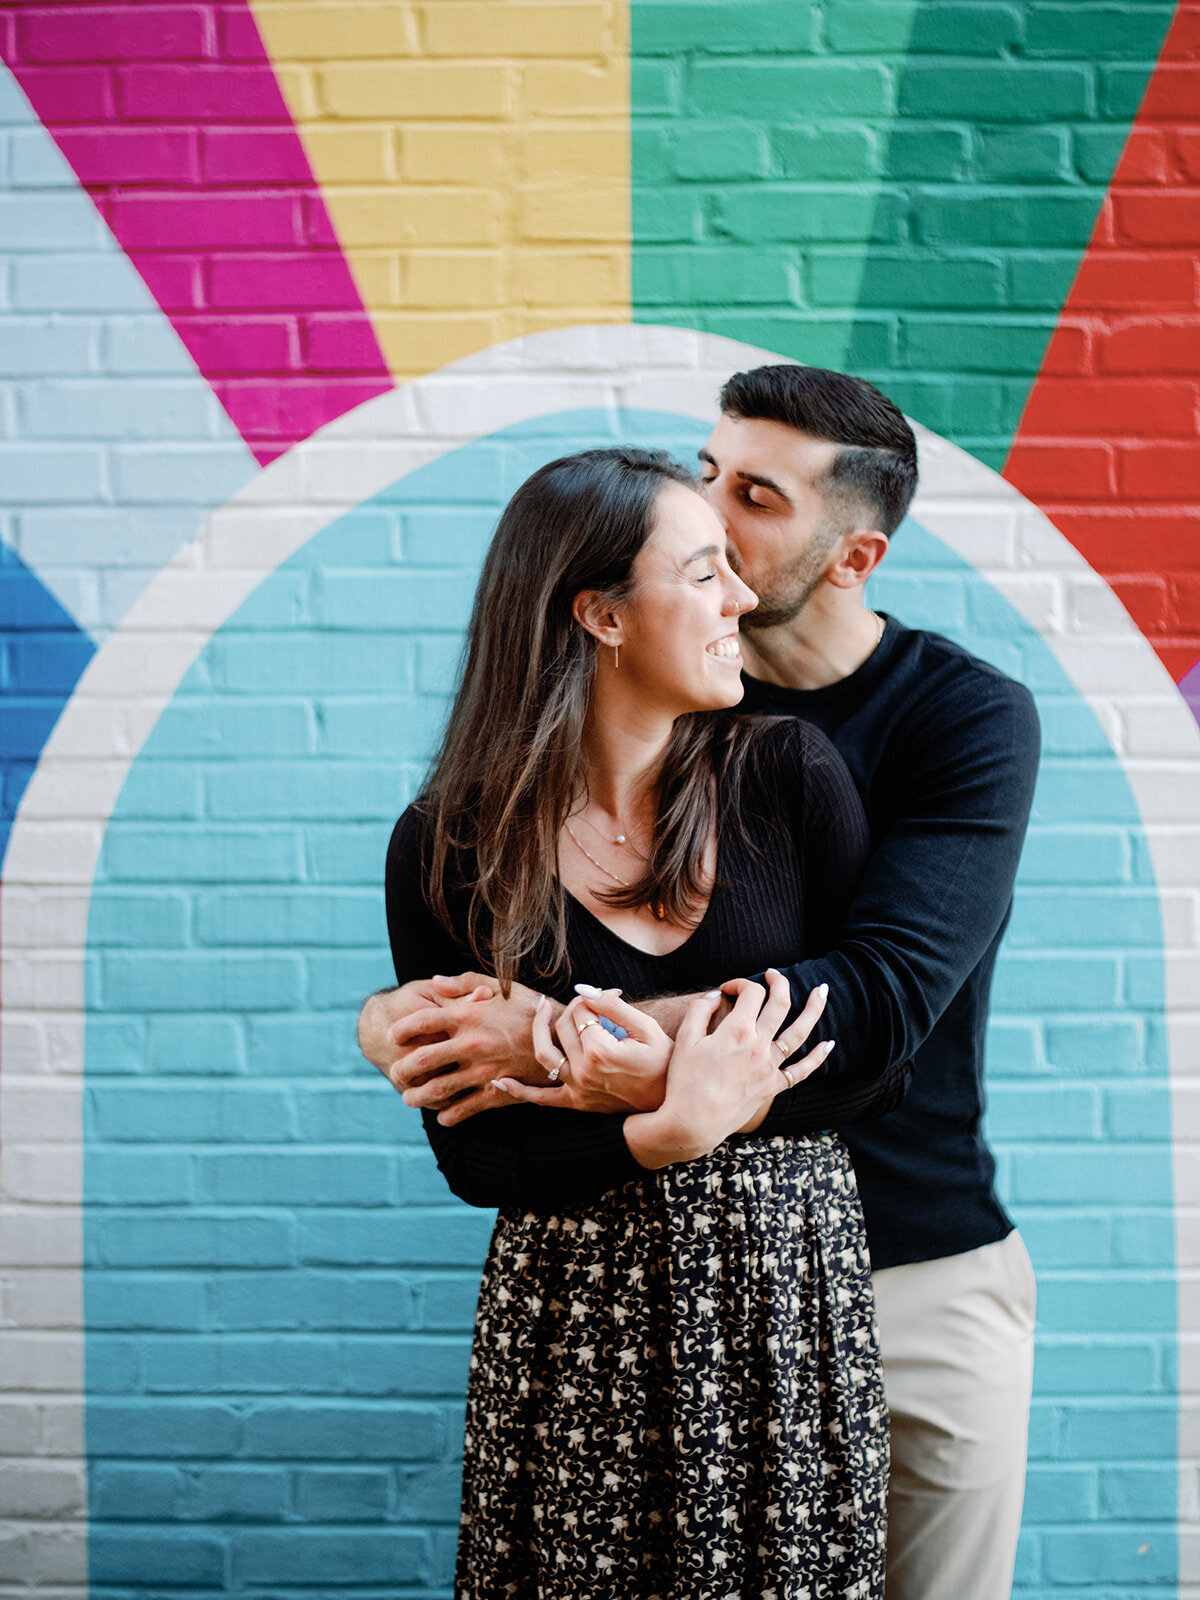 Photo in front of colurful mural in old town alexandria of couple embracing